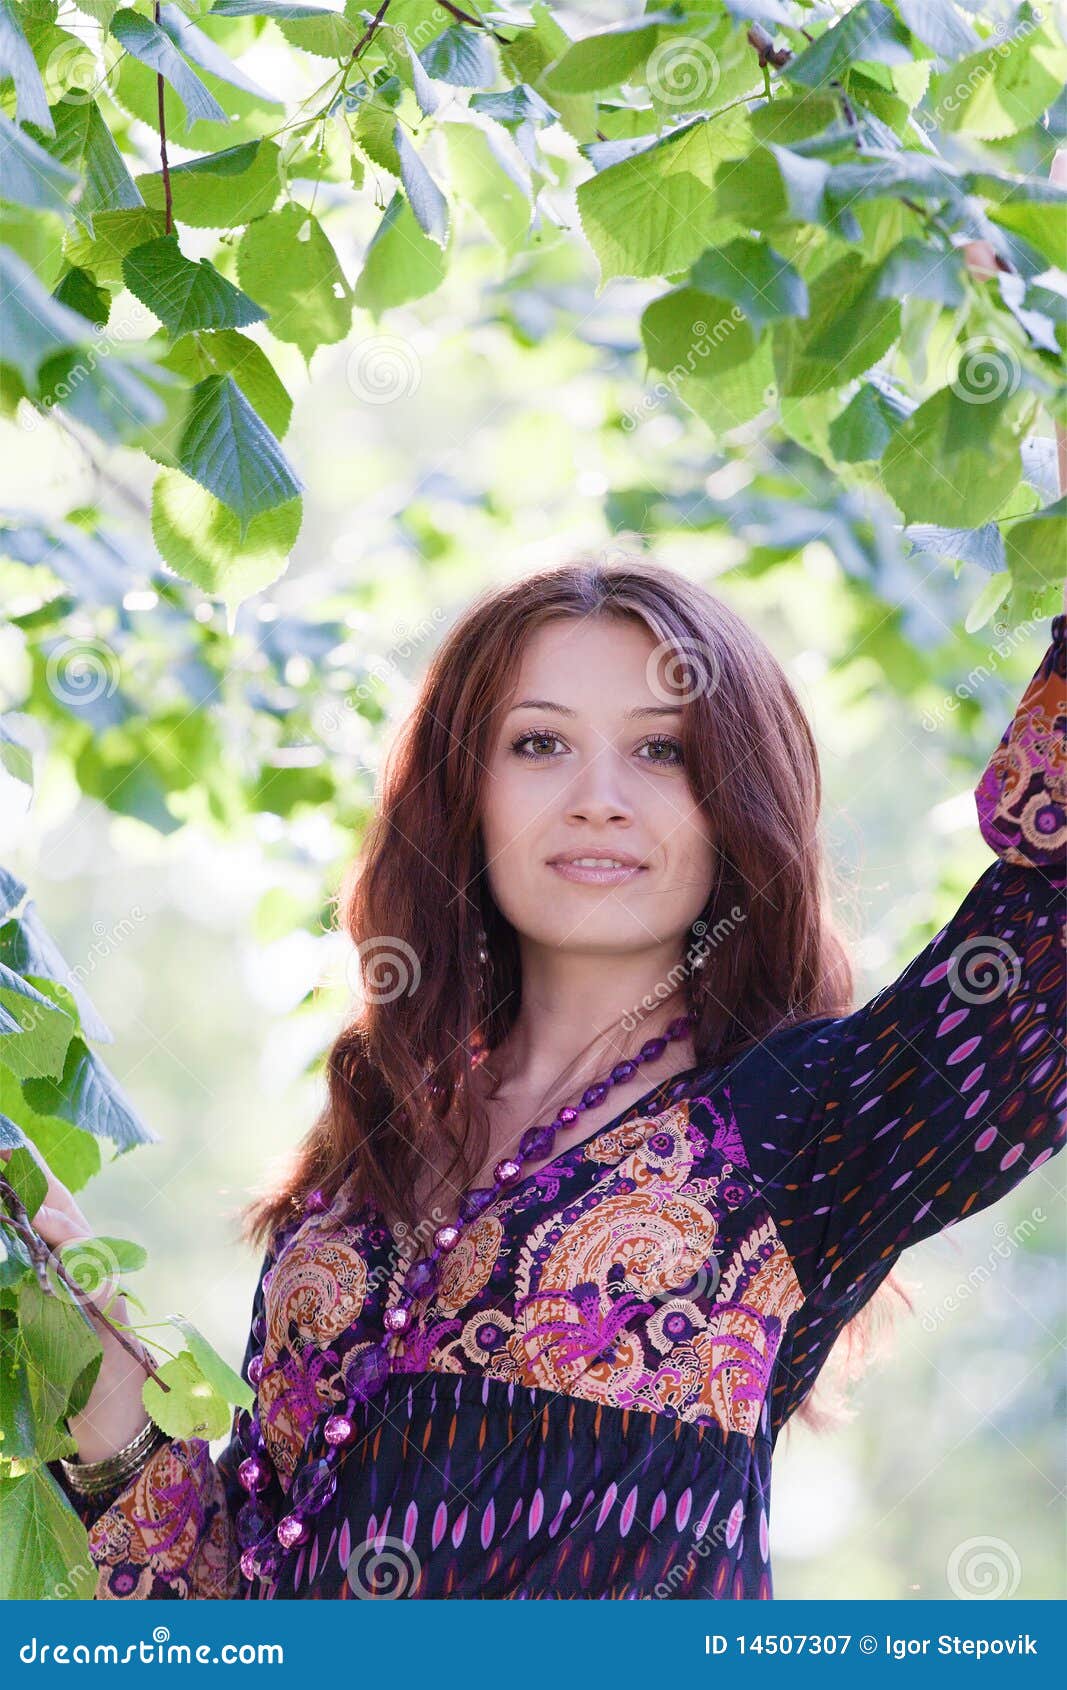 Young Woman Under Green Tree in Spring Park Stock Image - Image of ...